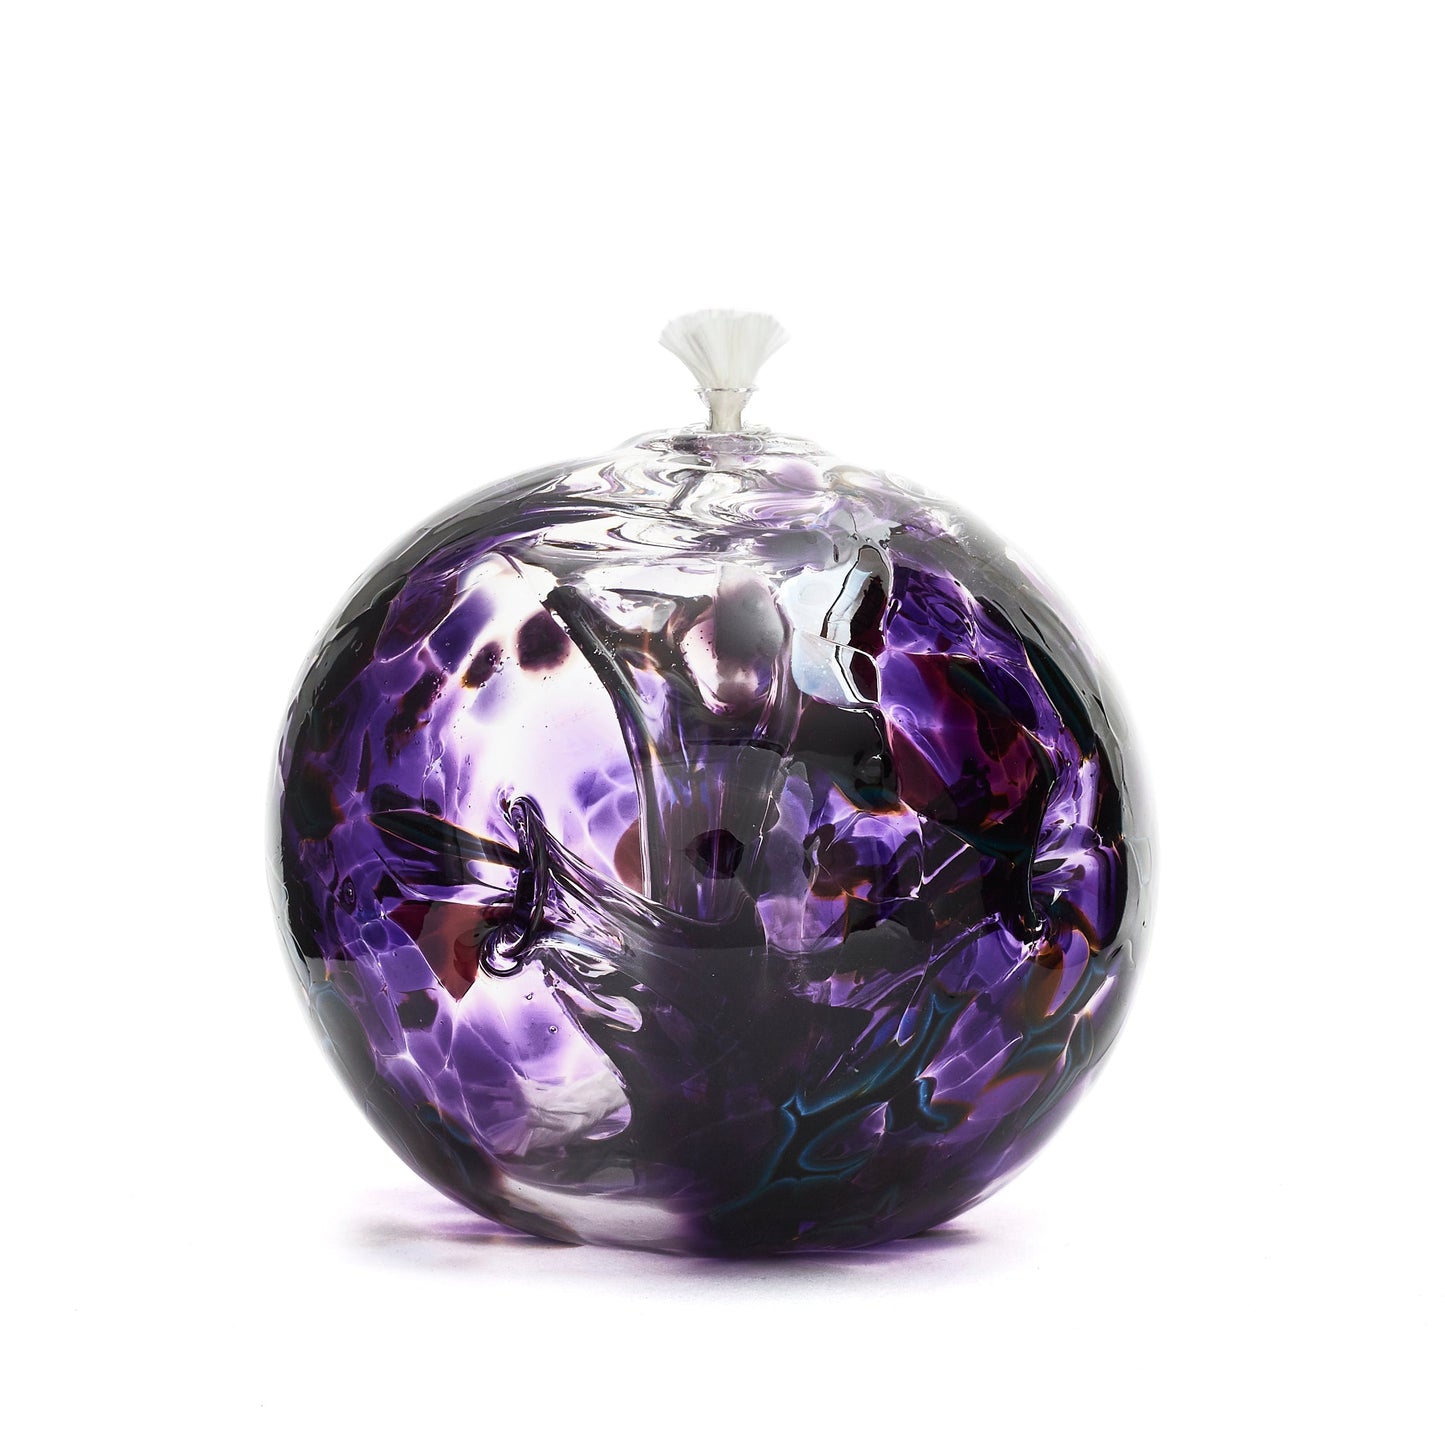 Handmade round purple glass oil lamp. Made in Ontario Canada by Gray Art Glass.